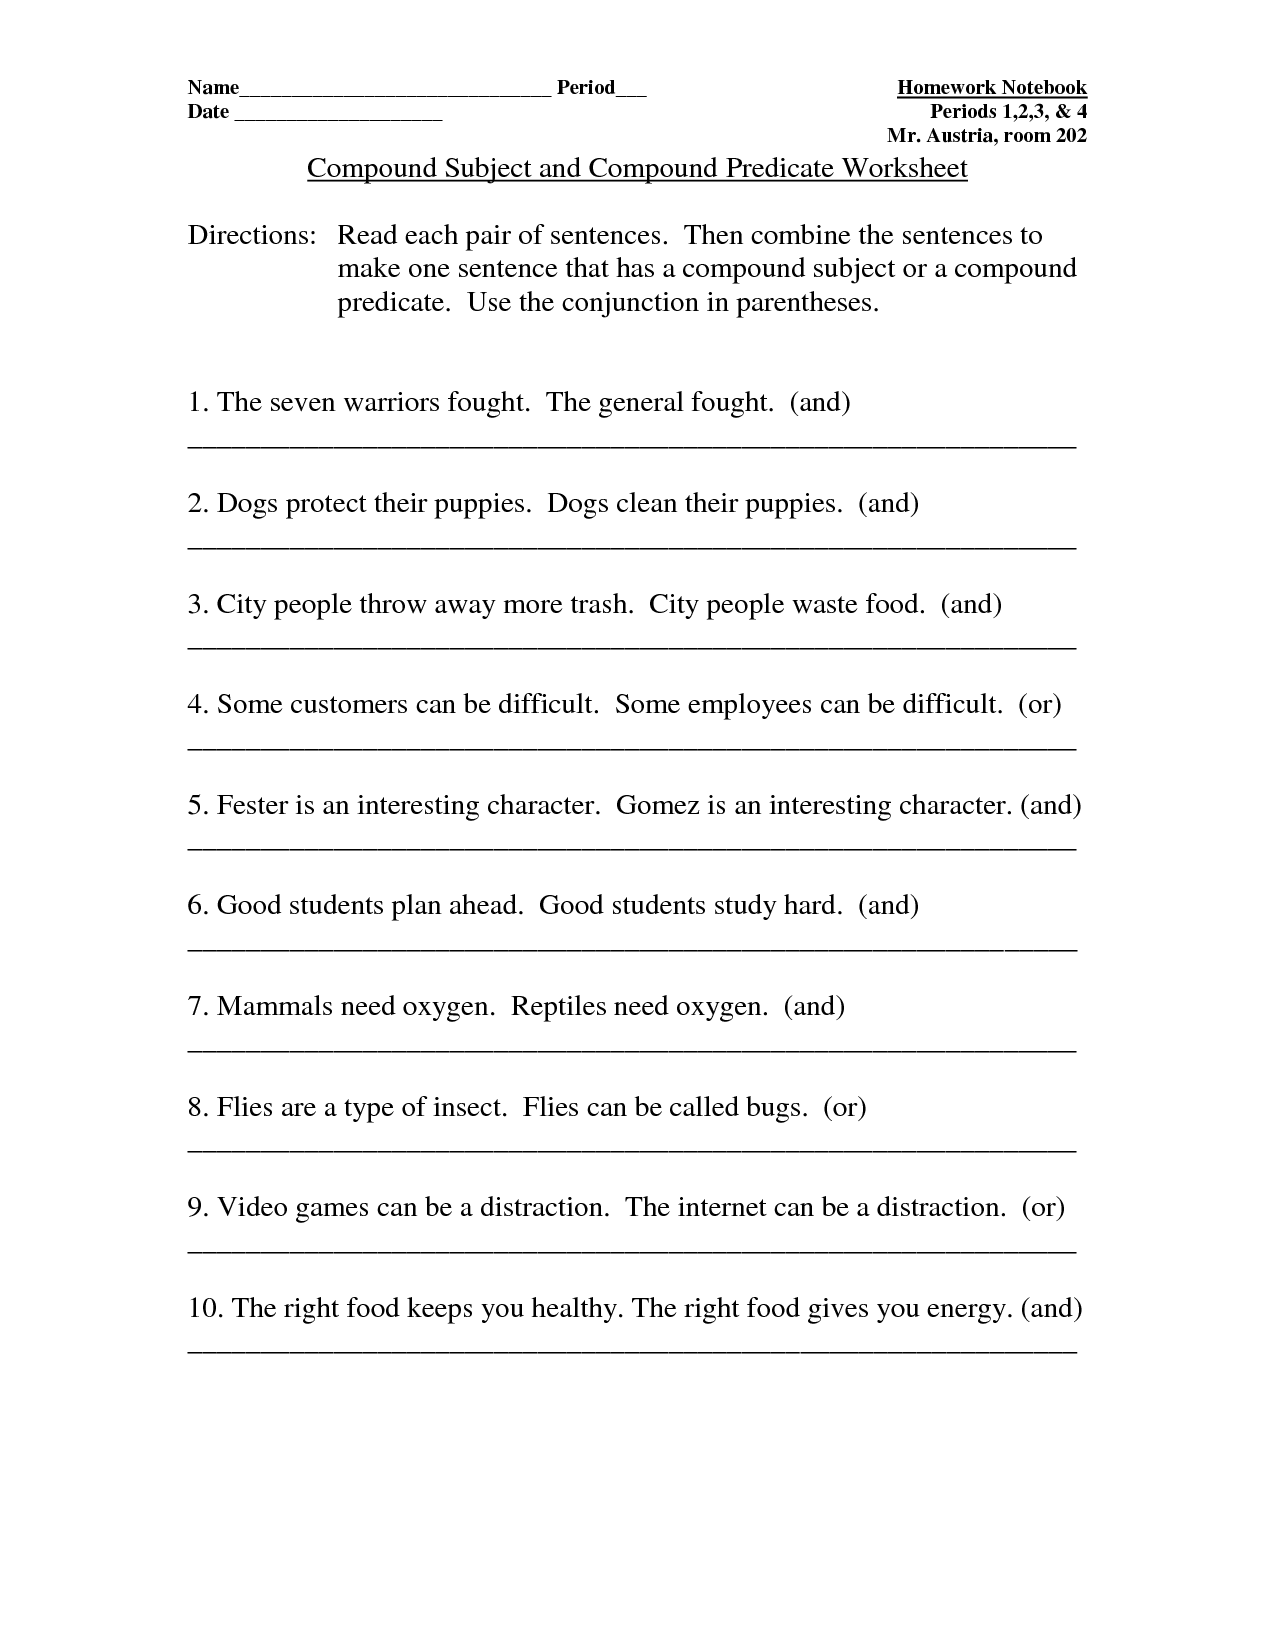 compound-subjects-and-predicate-worksheets